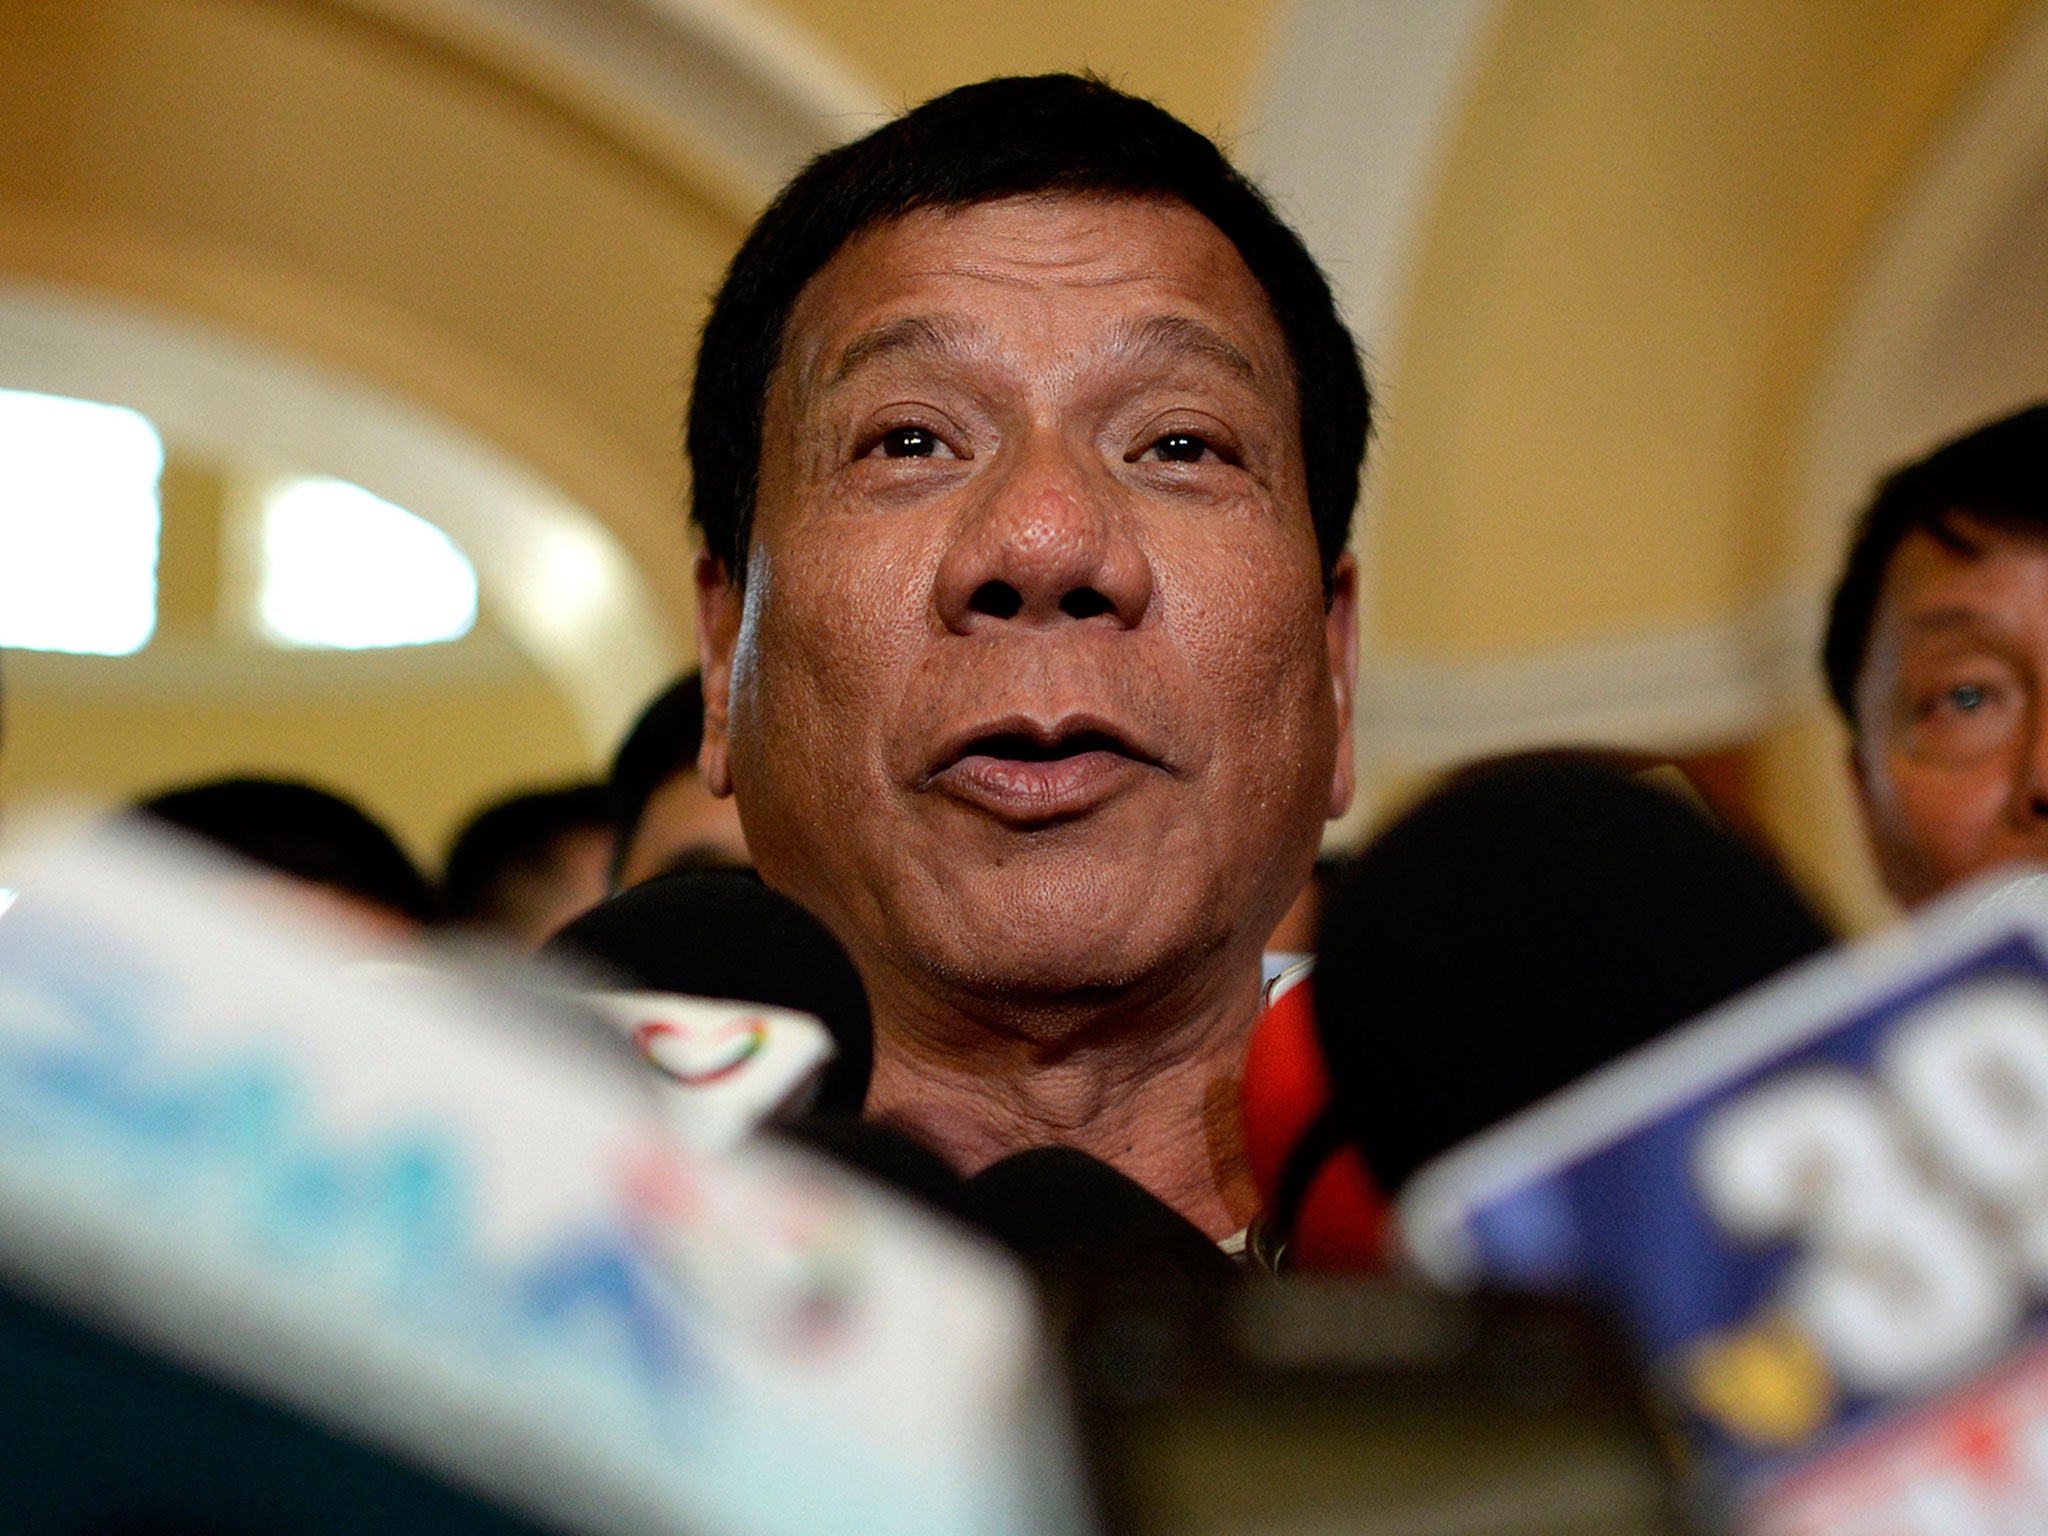 The latest opinion survey suggests Rodrigo Duterte is preferred candidate ahead of the 9 May election